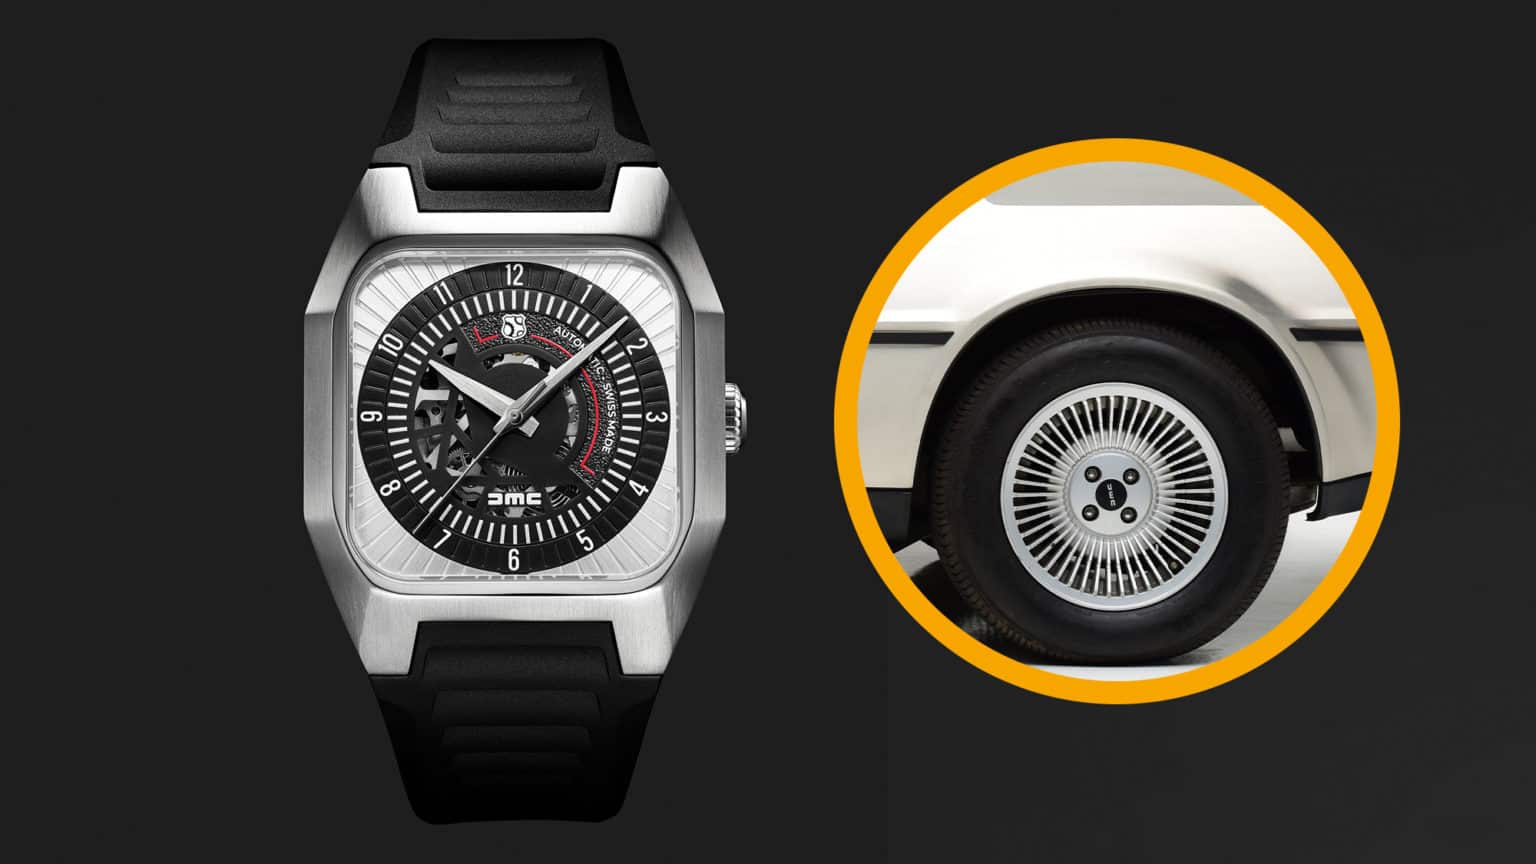 Company builds a watch… out of a DeLorean DMC-12